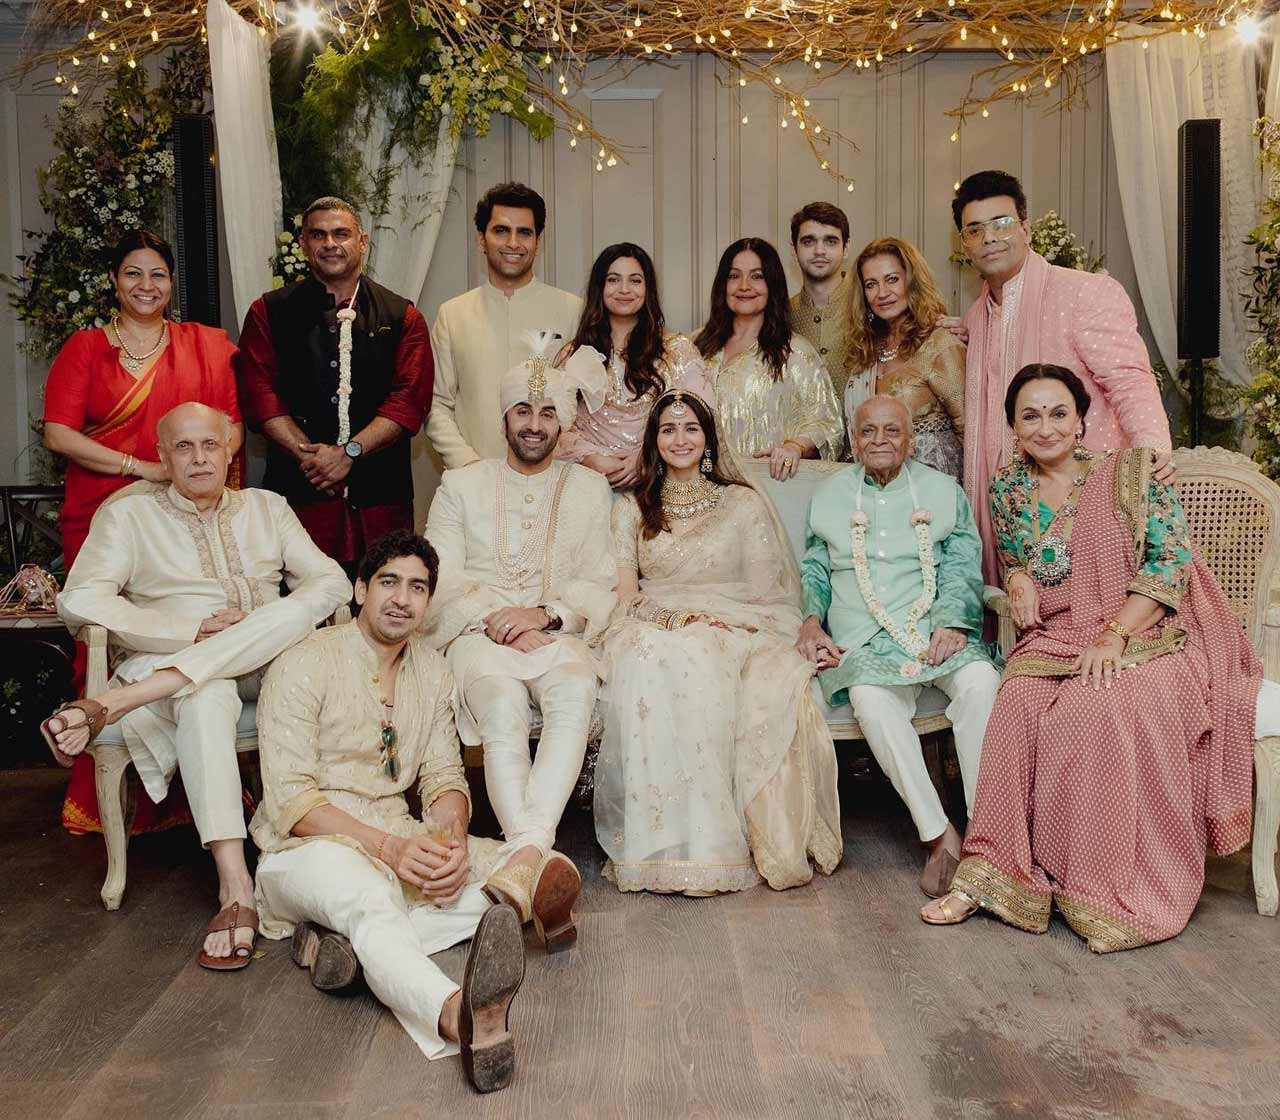 Earlier, Soni Razdan had posted a family photo featuring the Kapoors and Bhatts in a frame. In it, Ranbir Kapoor and Alia Bhatt could be seen posing with their family members for the camera.